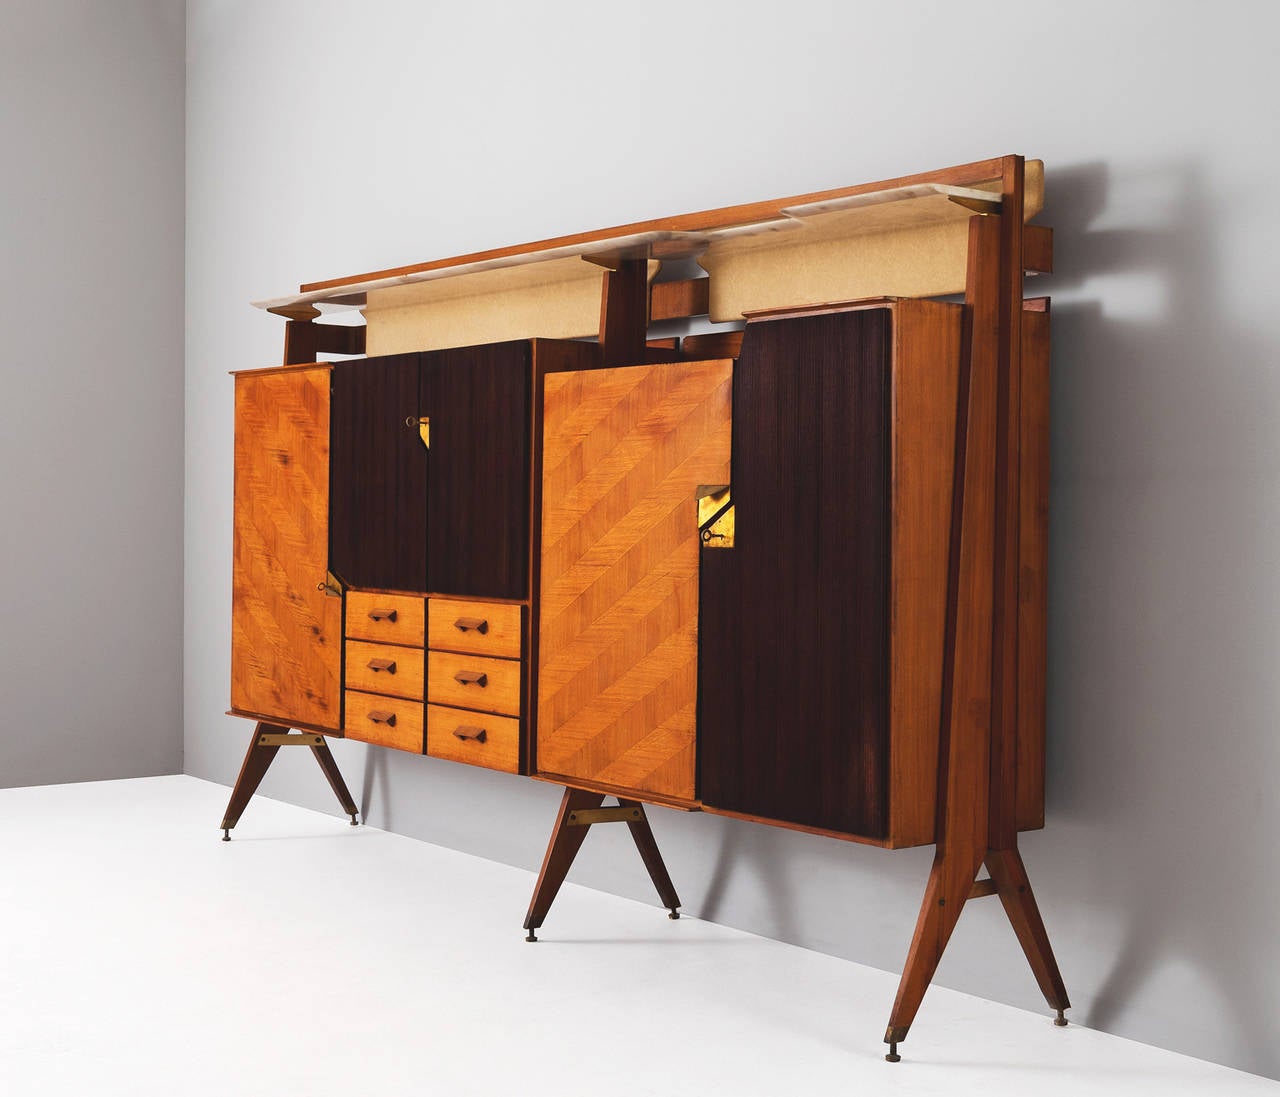 Italian wall console, Italy 1950s.

This expressive Italian cabinet is equipped with doors, drawers, shelves and a dry bar, all made out of high quality wood types.

The different doors and drawers are finished with either smooth, geometric